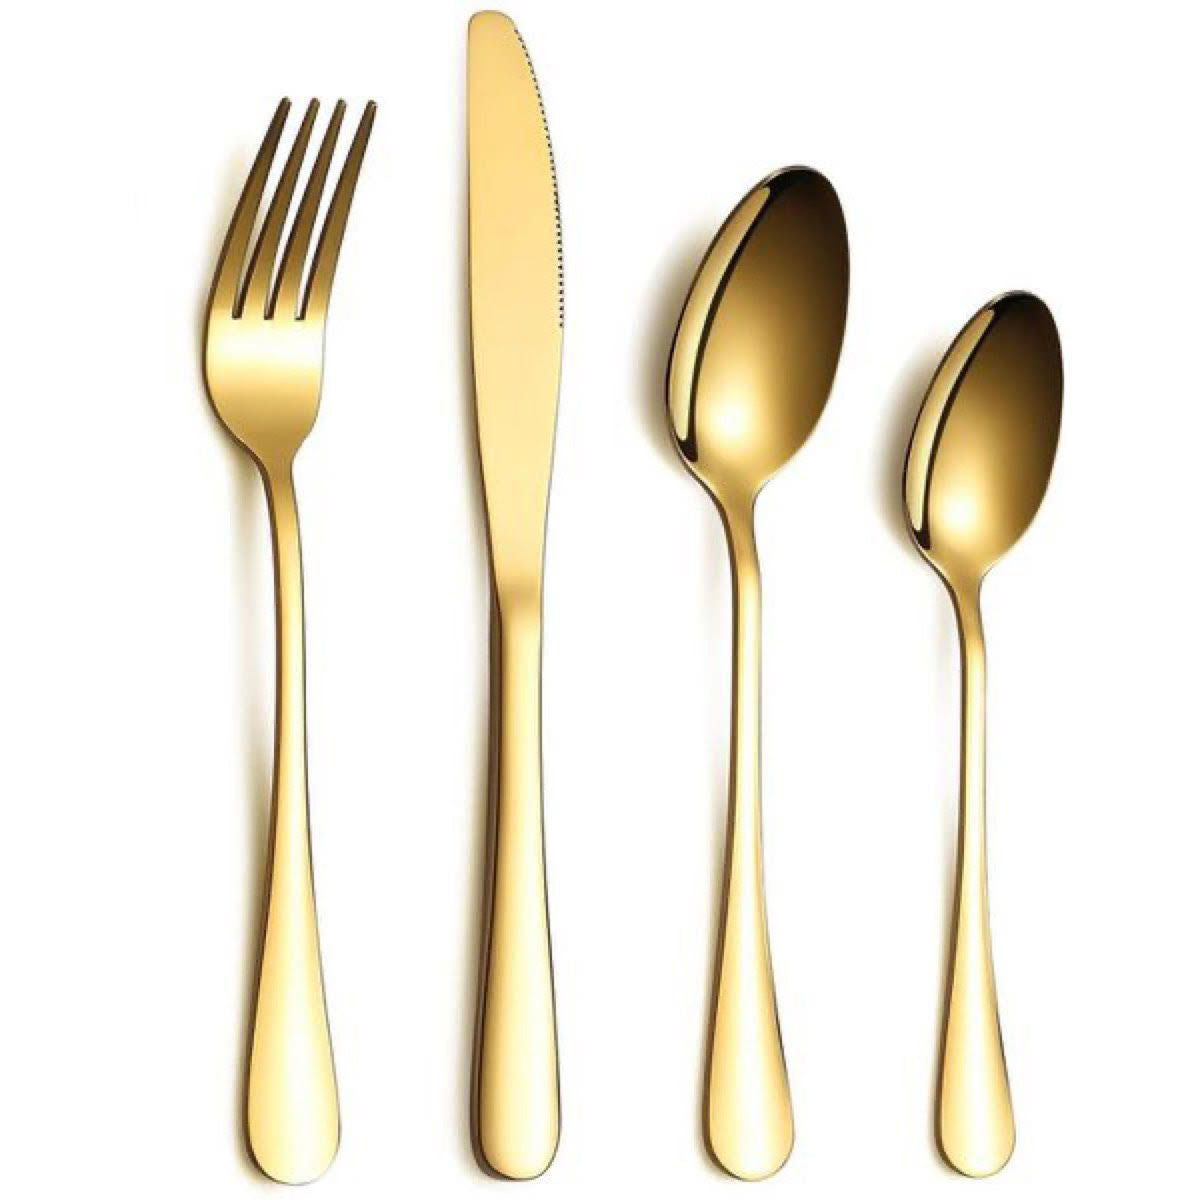 LMA Authentic Cutlery Dinner Set In Golden Box - 24 Piece - Gold